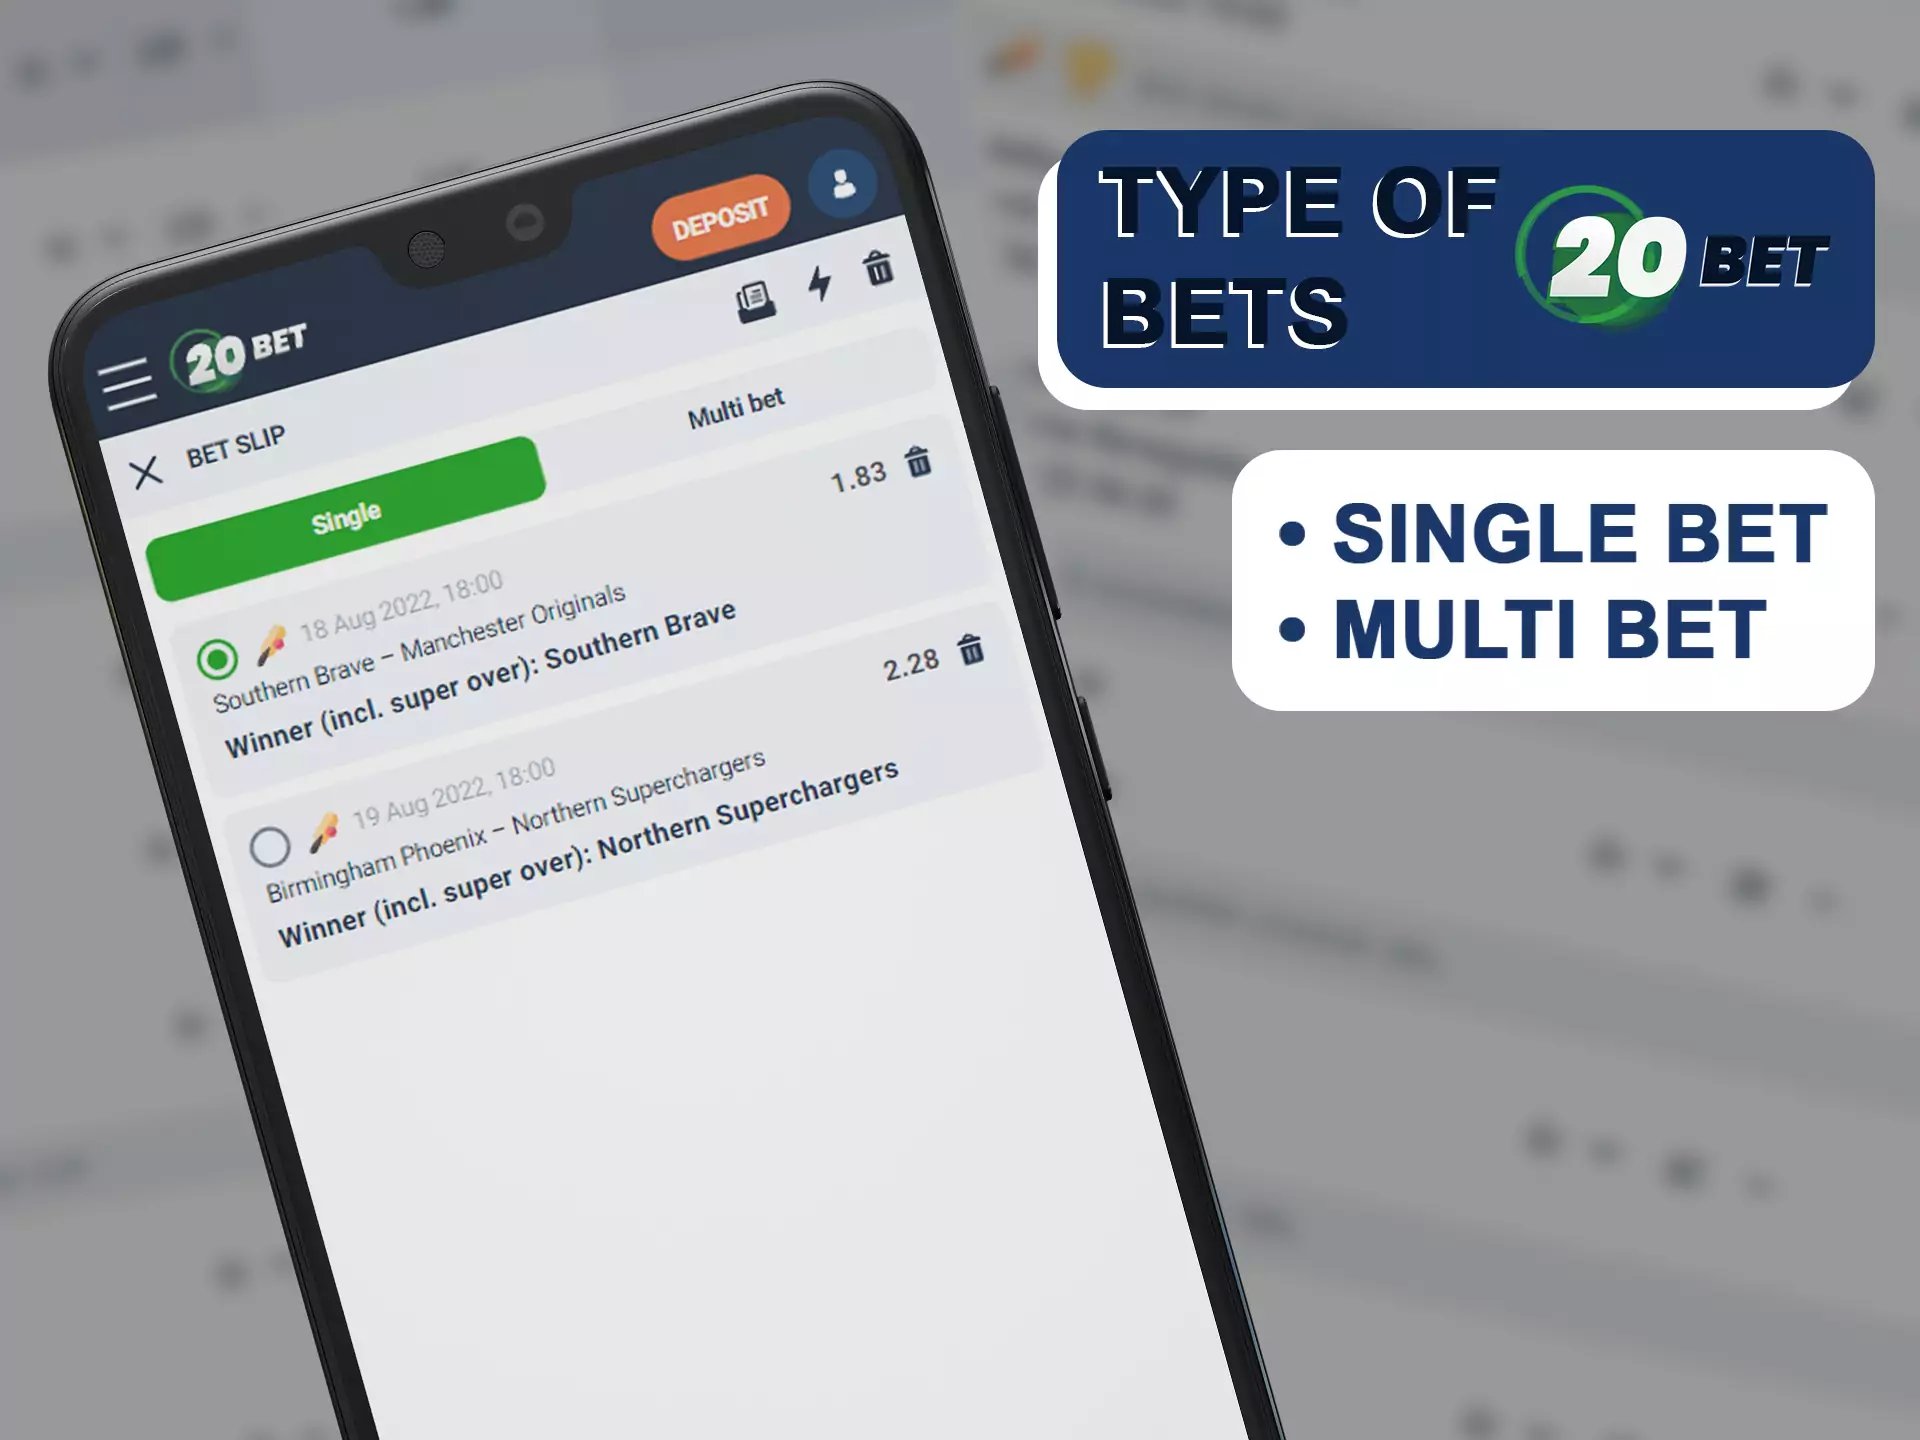 Choose how you want to bet in the 20bet app.